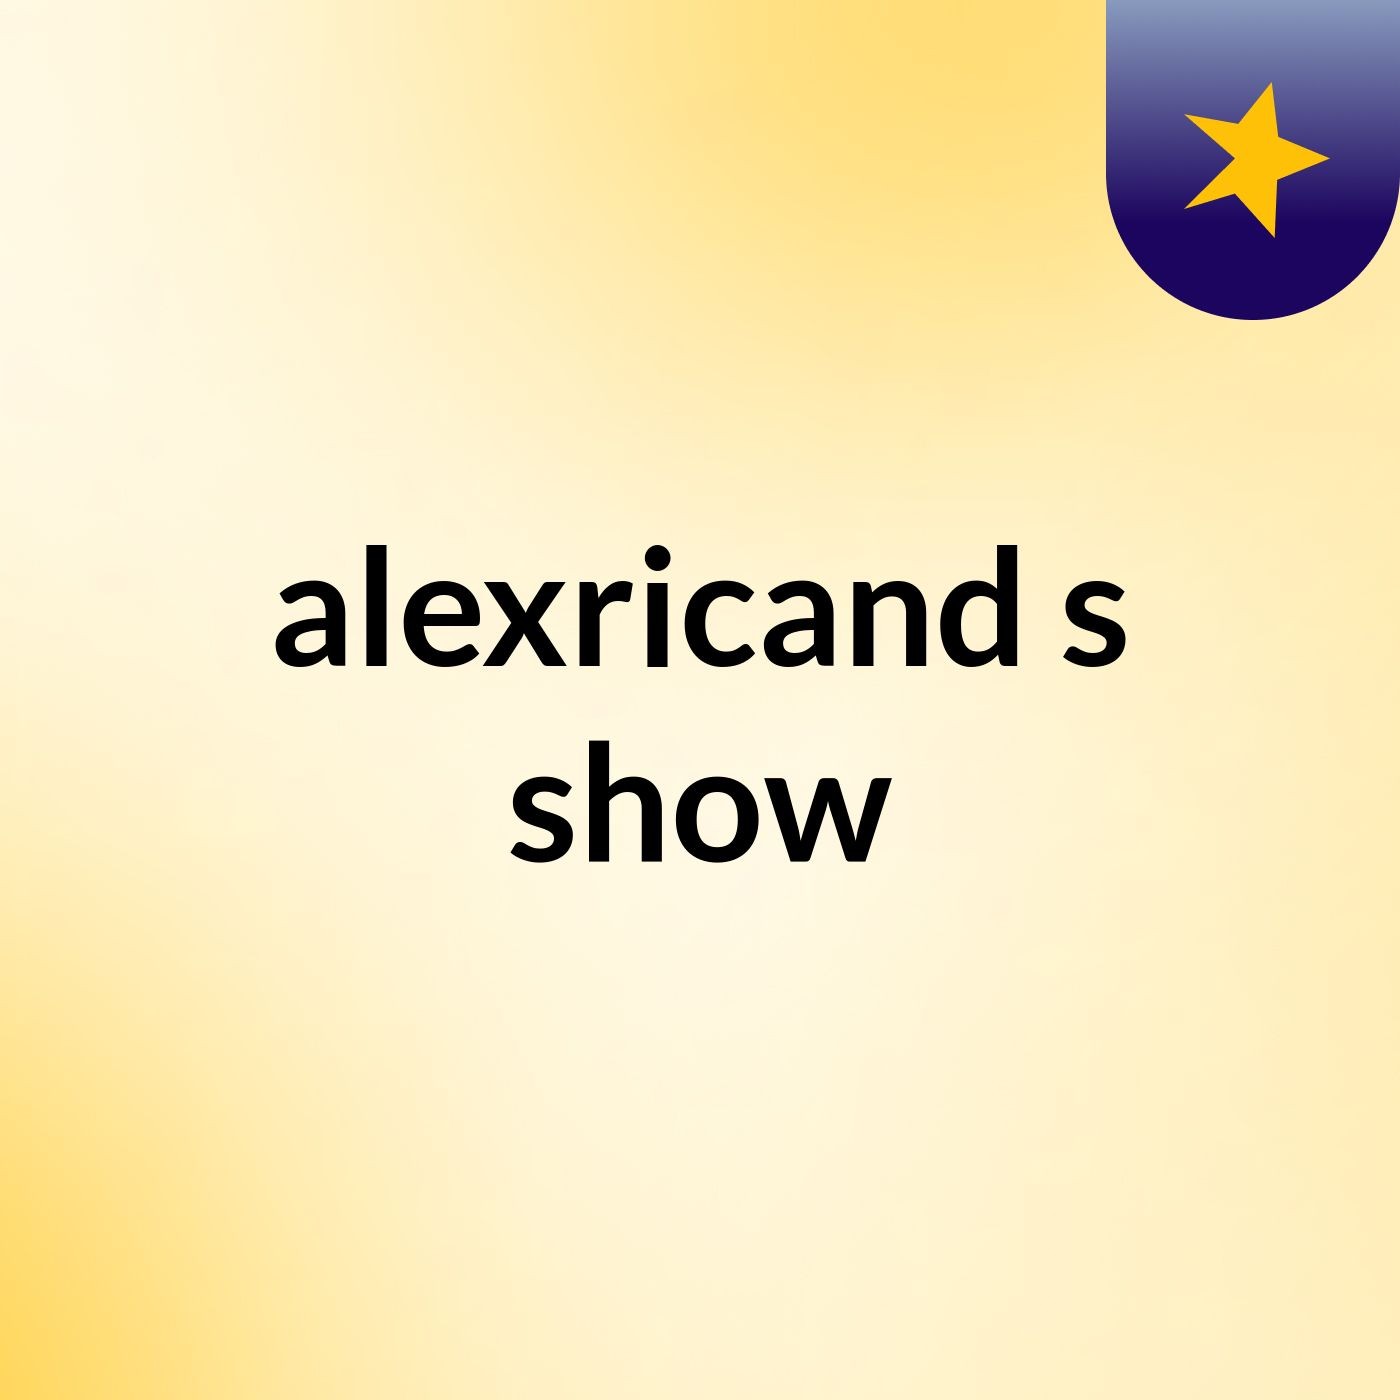 alexricand's show